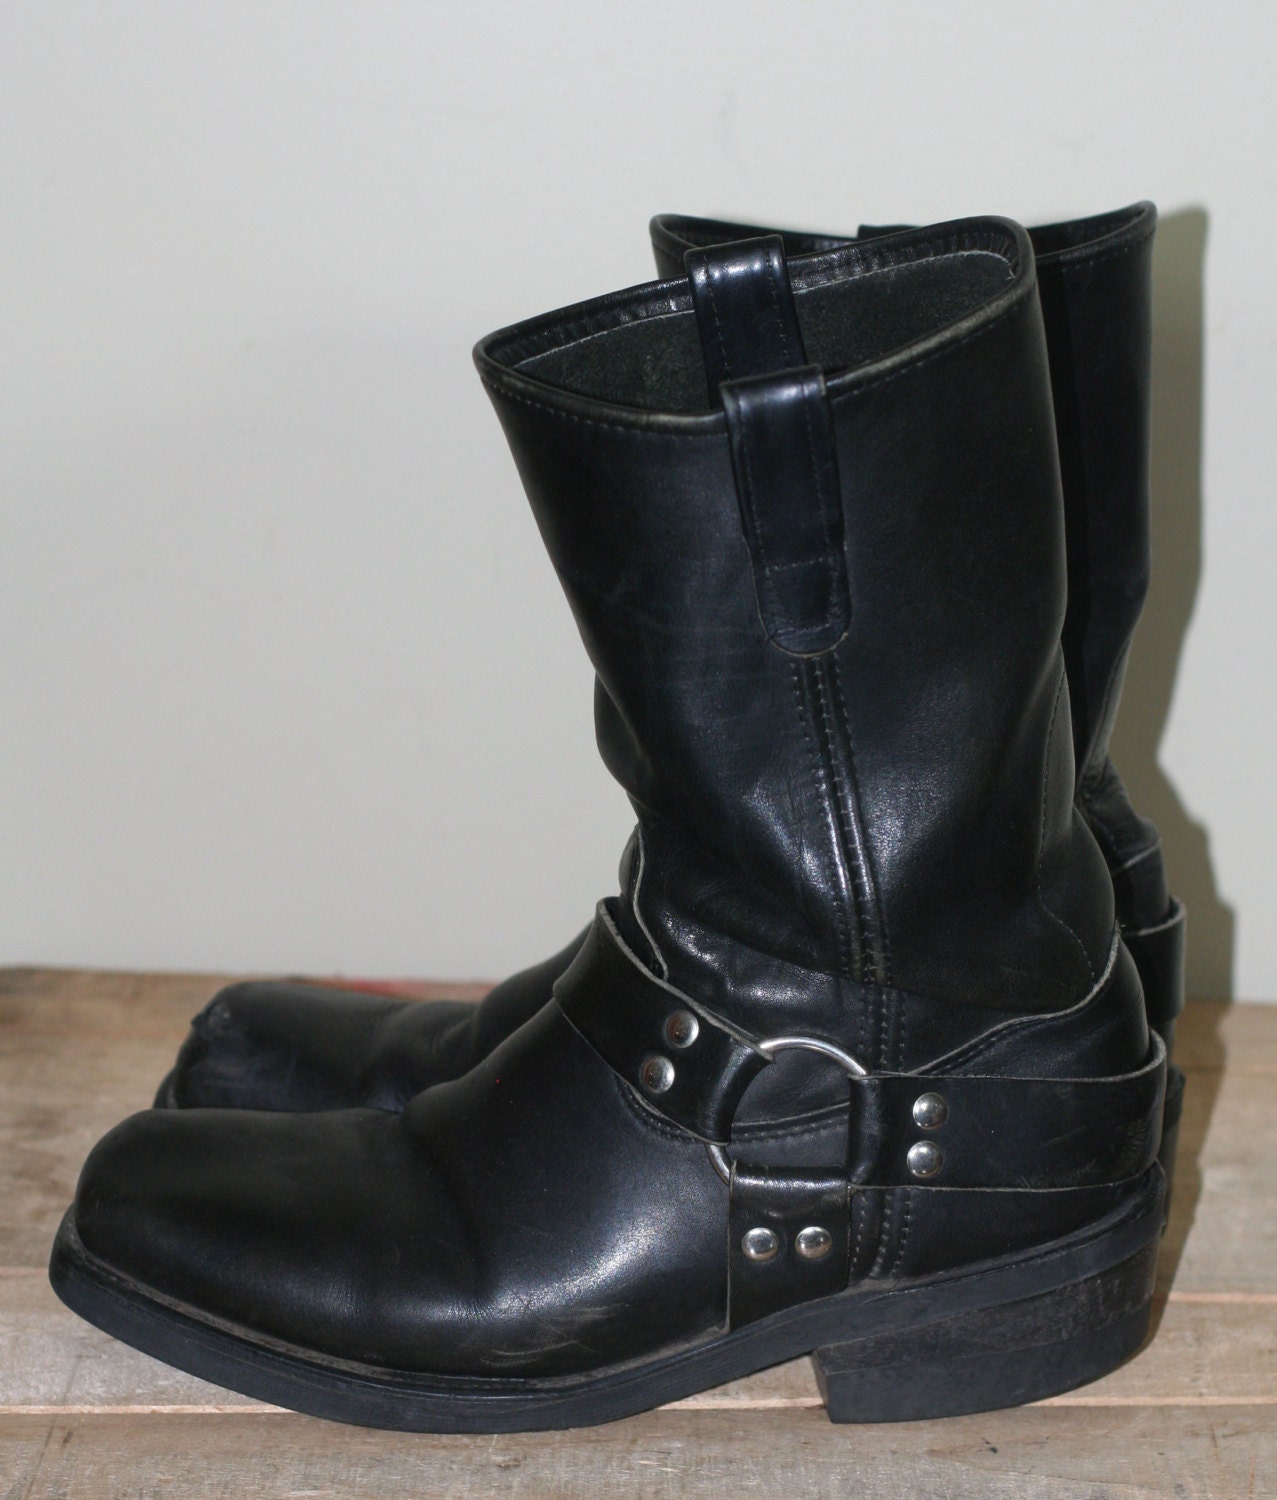 vintage men's black leather harness boots size by TomTomVintage